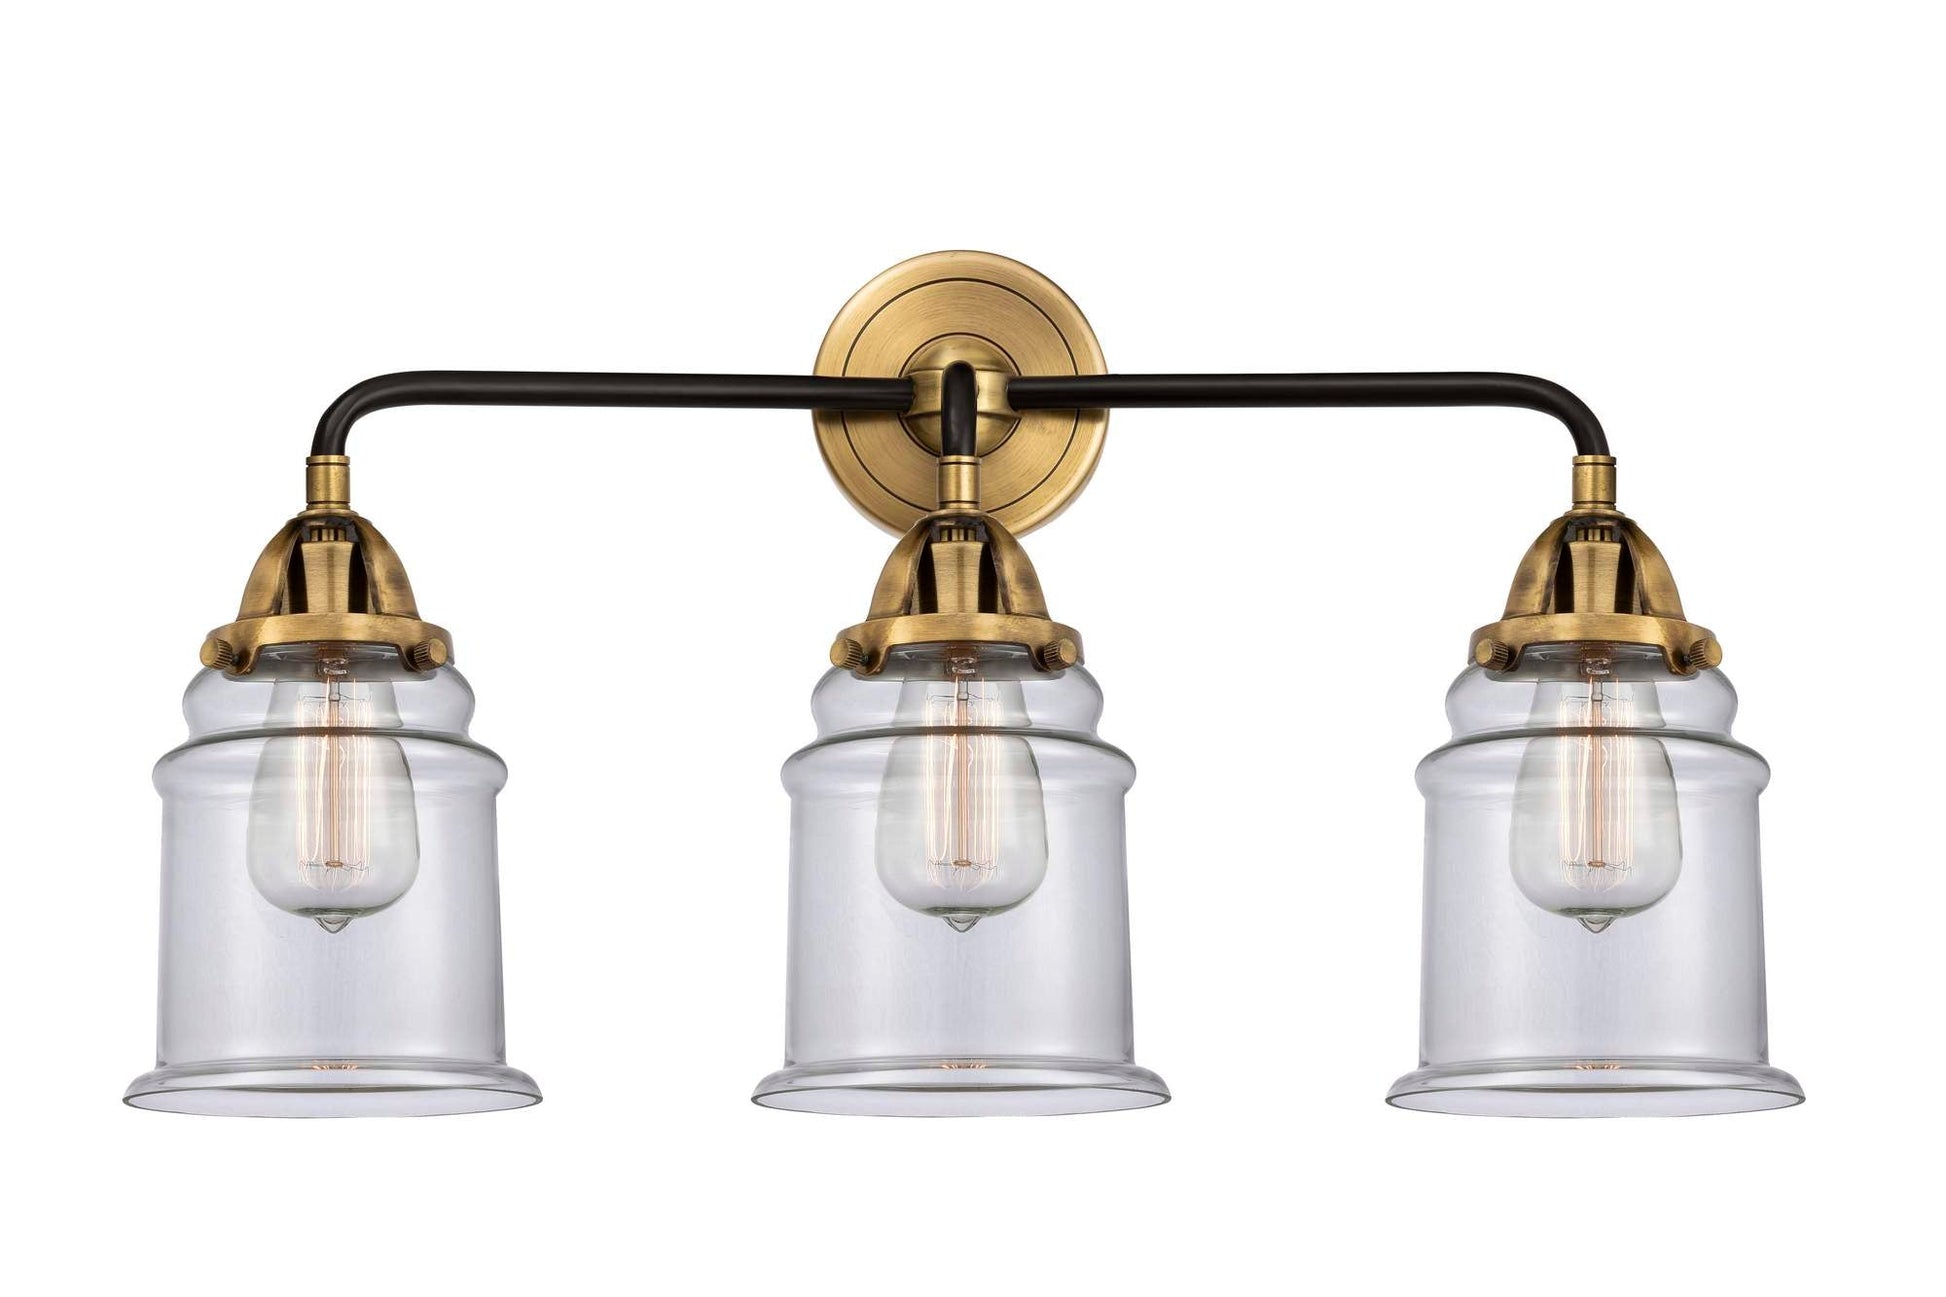 3-Light 24" Black Antique Brass Bath Vanity Light - Clear Canton Glass - Choice of Finish And Incandesent Or LED Bulbs